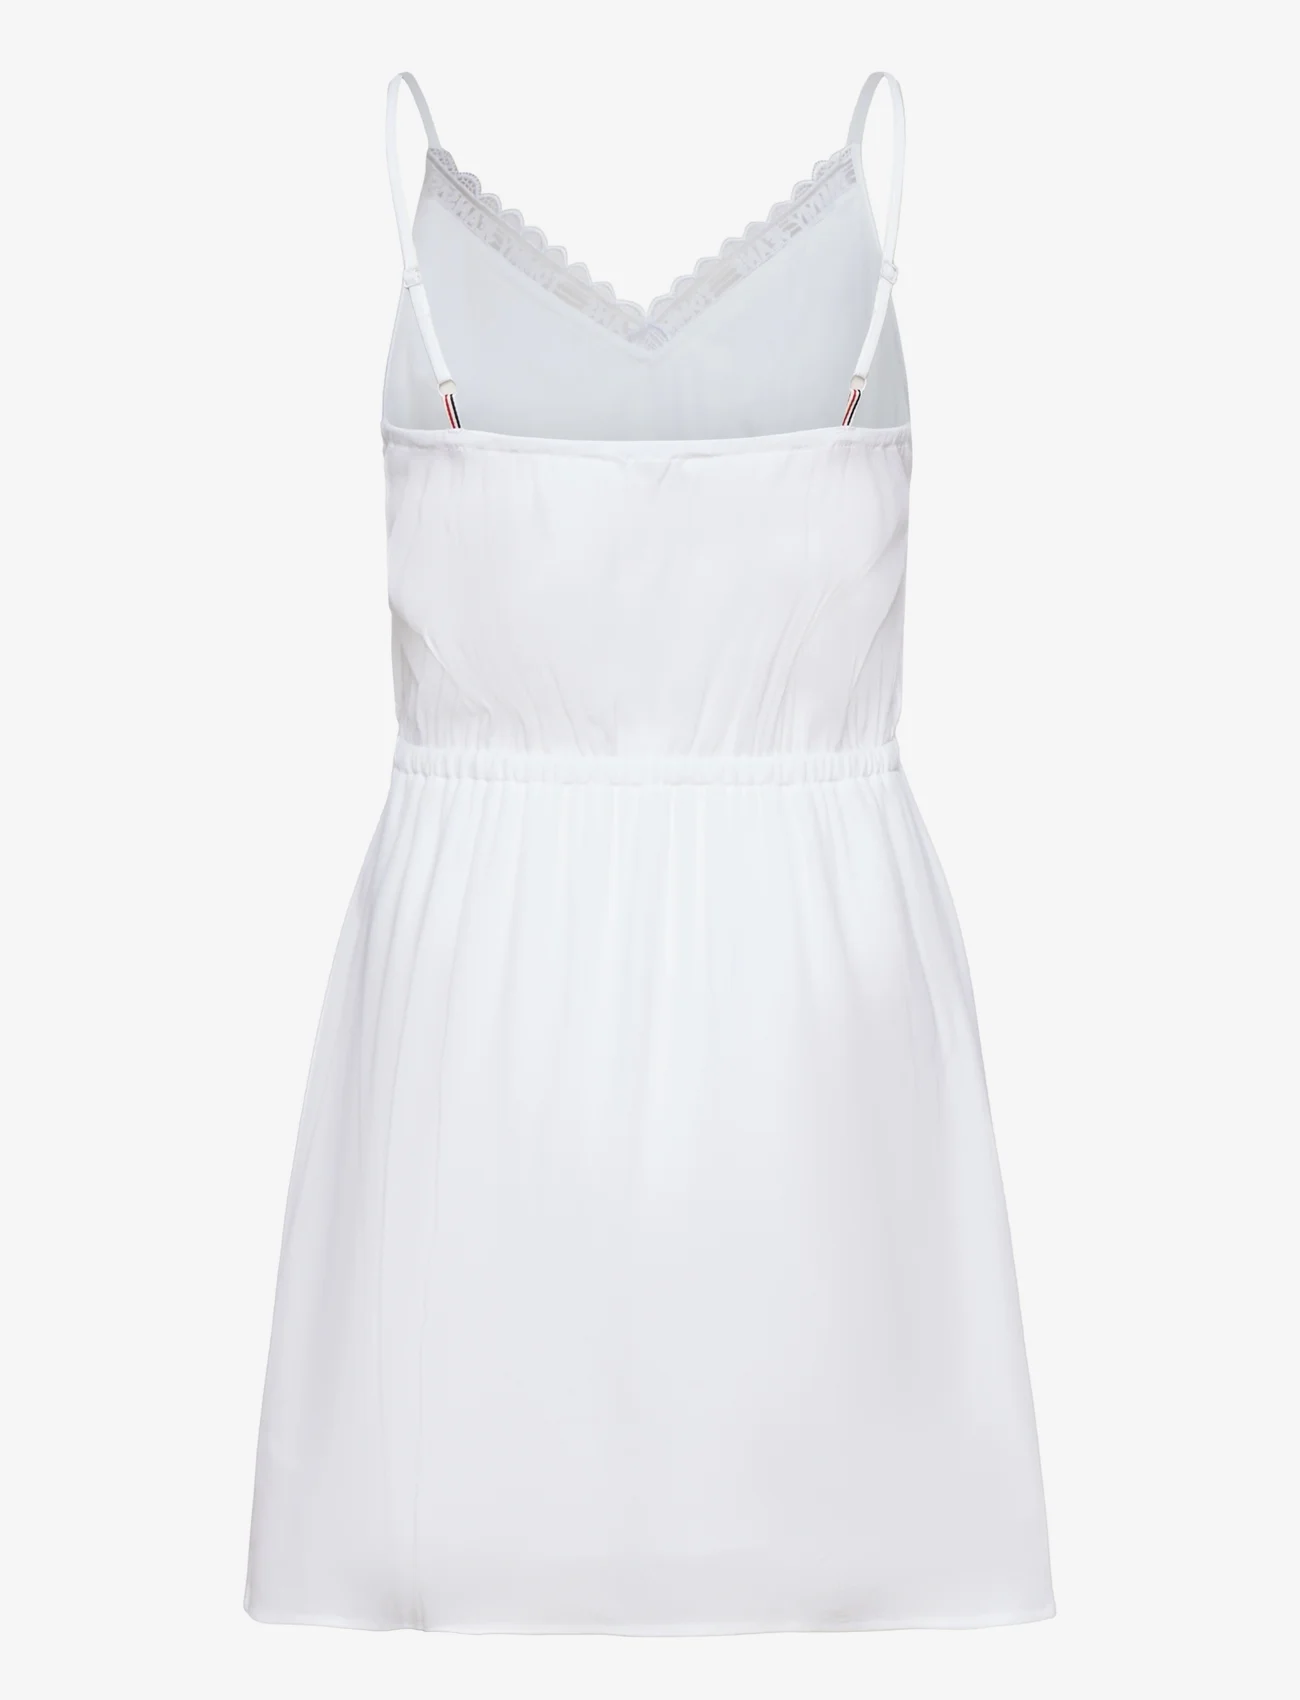 Tommy Jeans - TJW ESSENTIAL LACE STRAP DRESS - t-paitamekot - white - 1